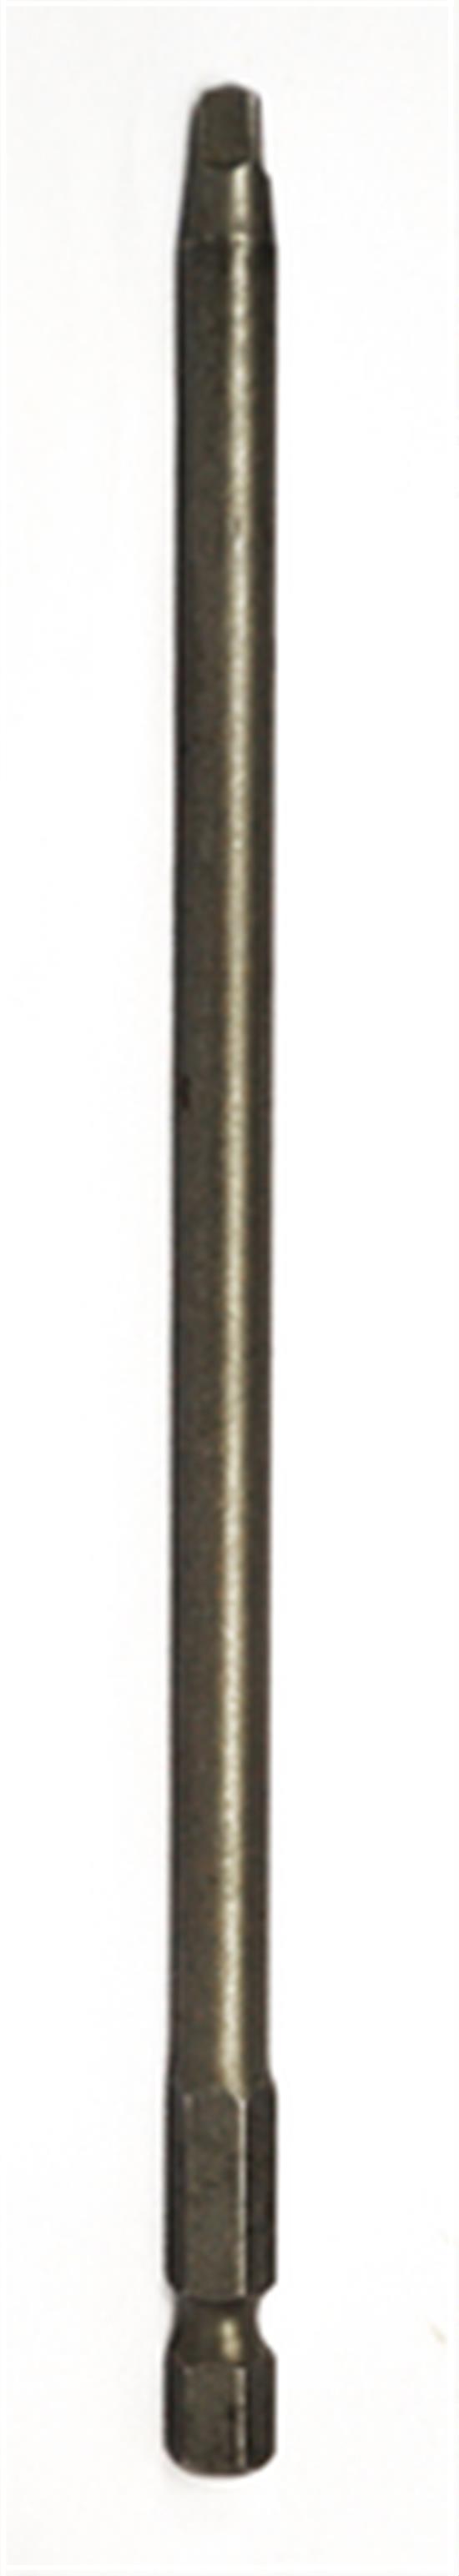 Picture of PRED R1X6" SQRE POWER BIT